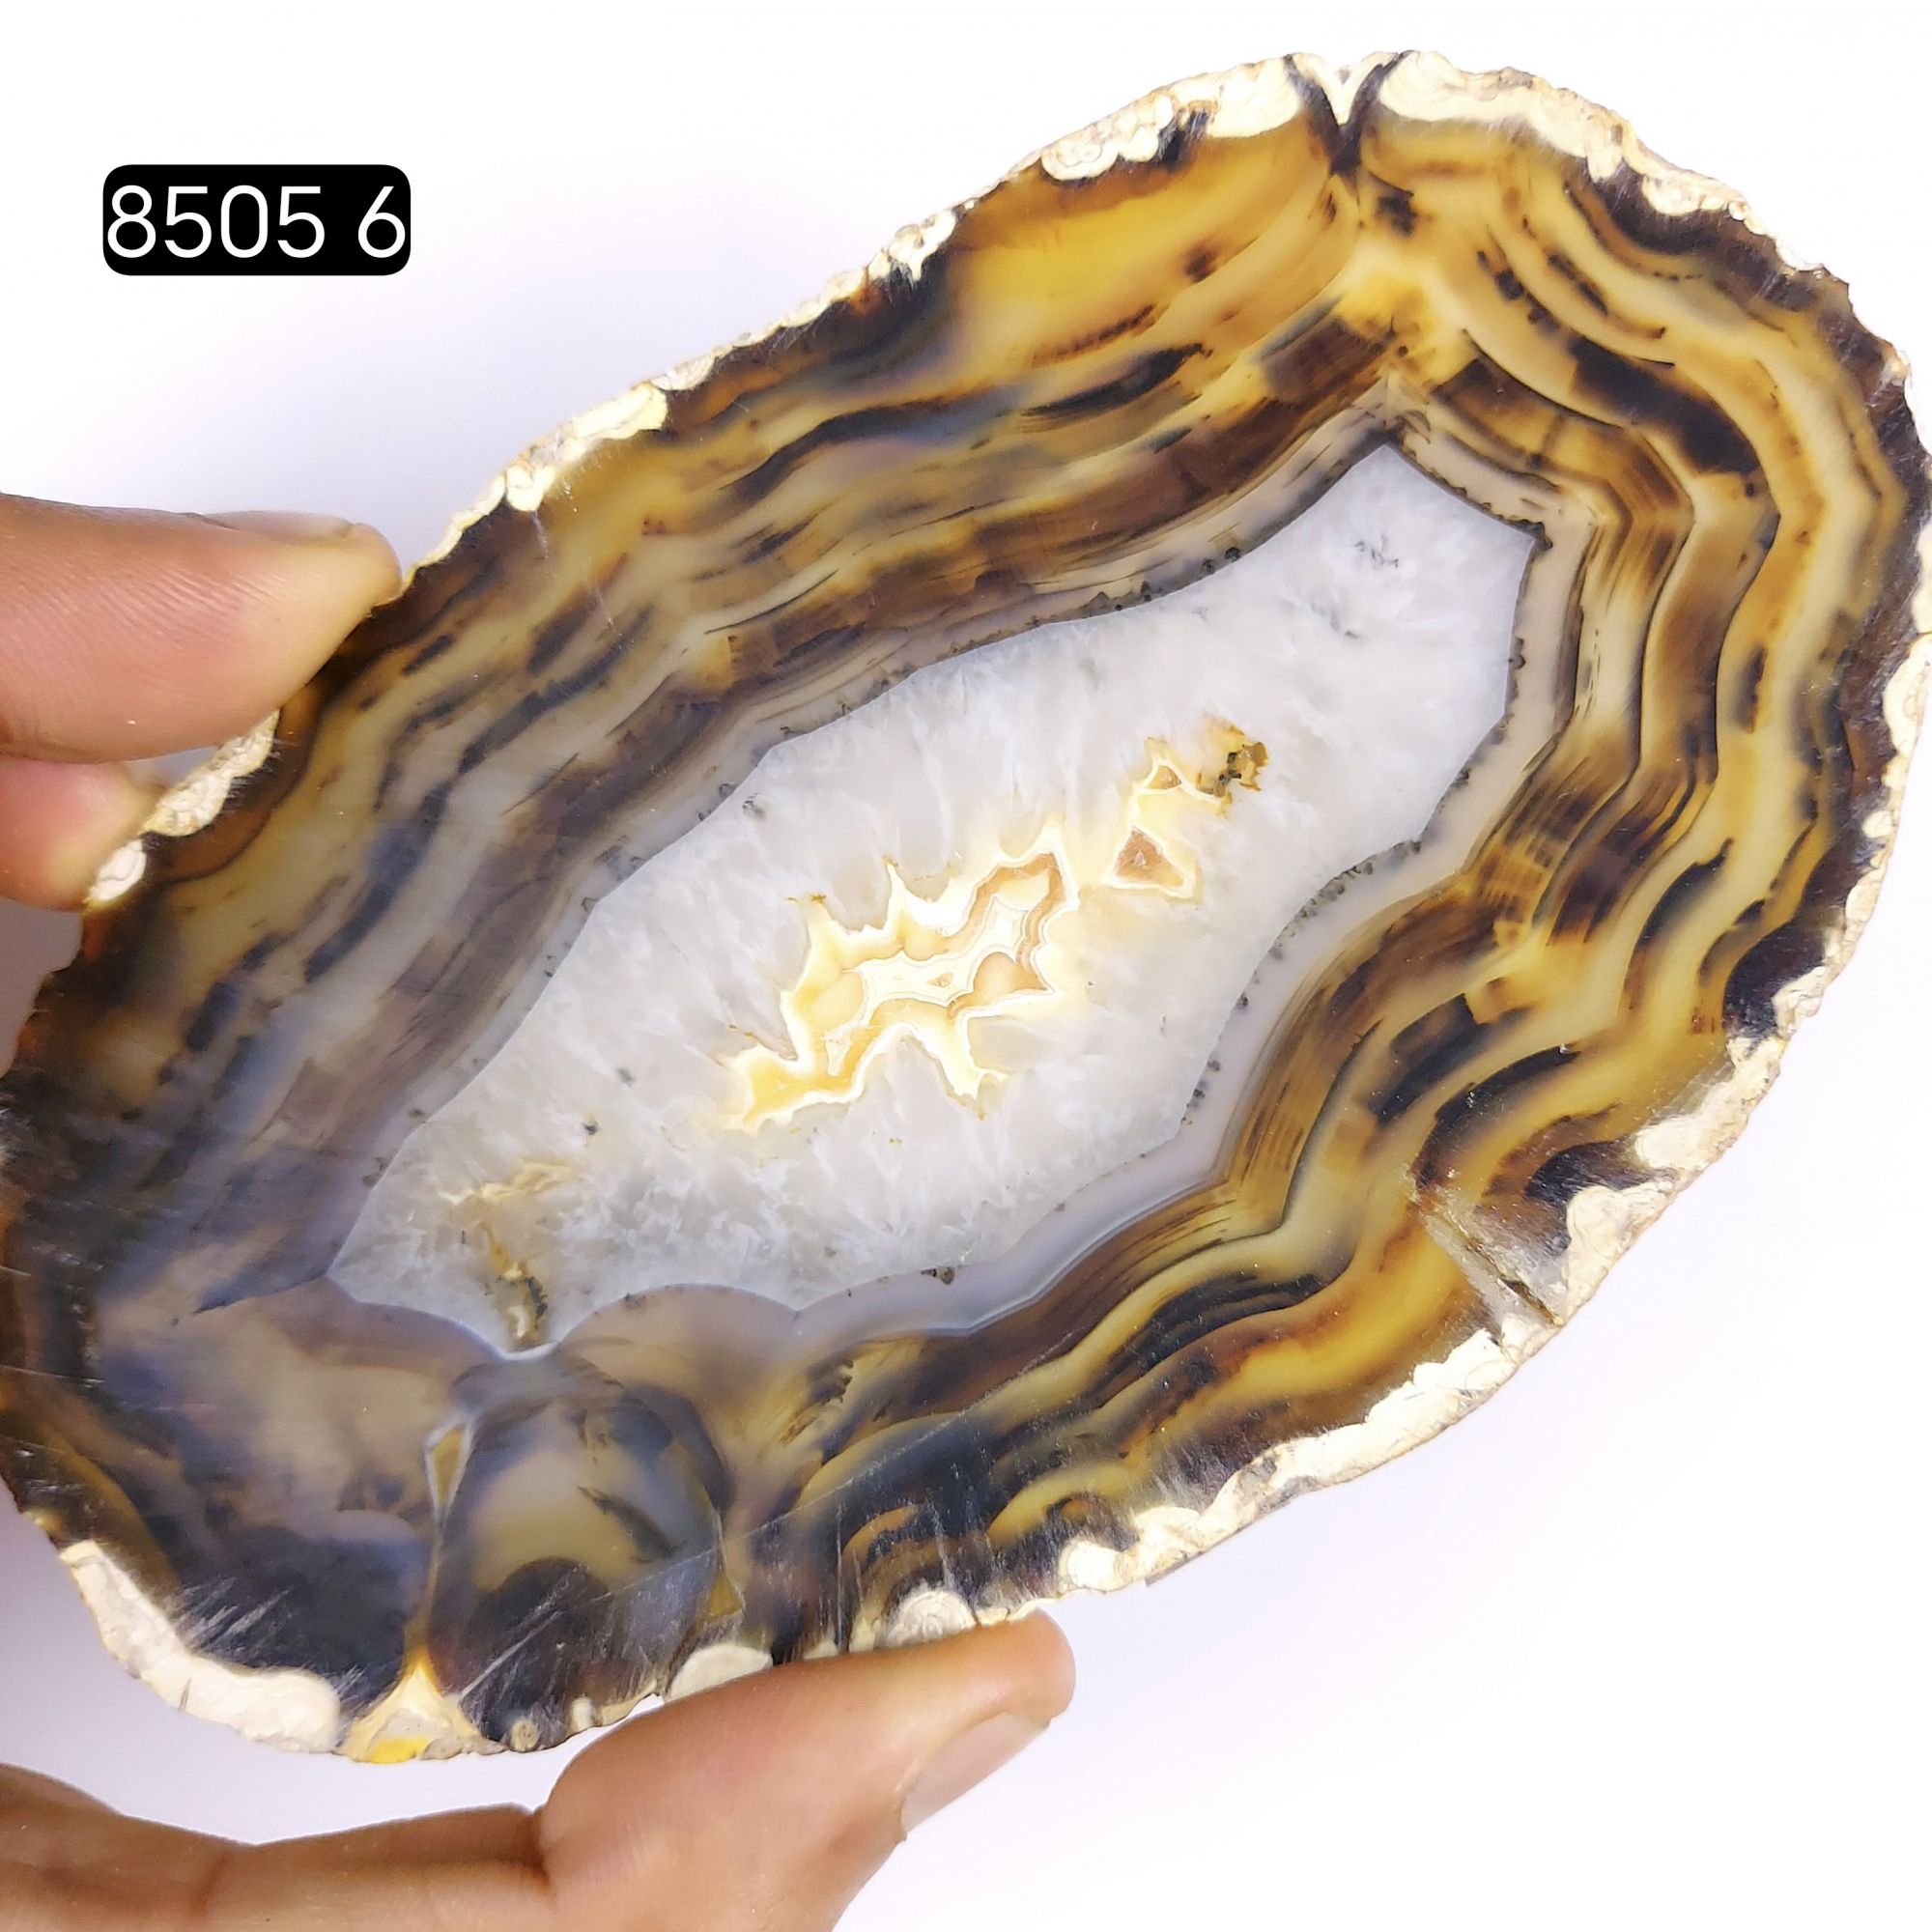 1Pcs 643Cts Natural Agate Slice Geode Slices Crystal Agate Slice Loose Gemstone For Jewelry Making Lot 130x80mm #8505-6